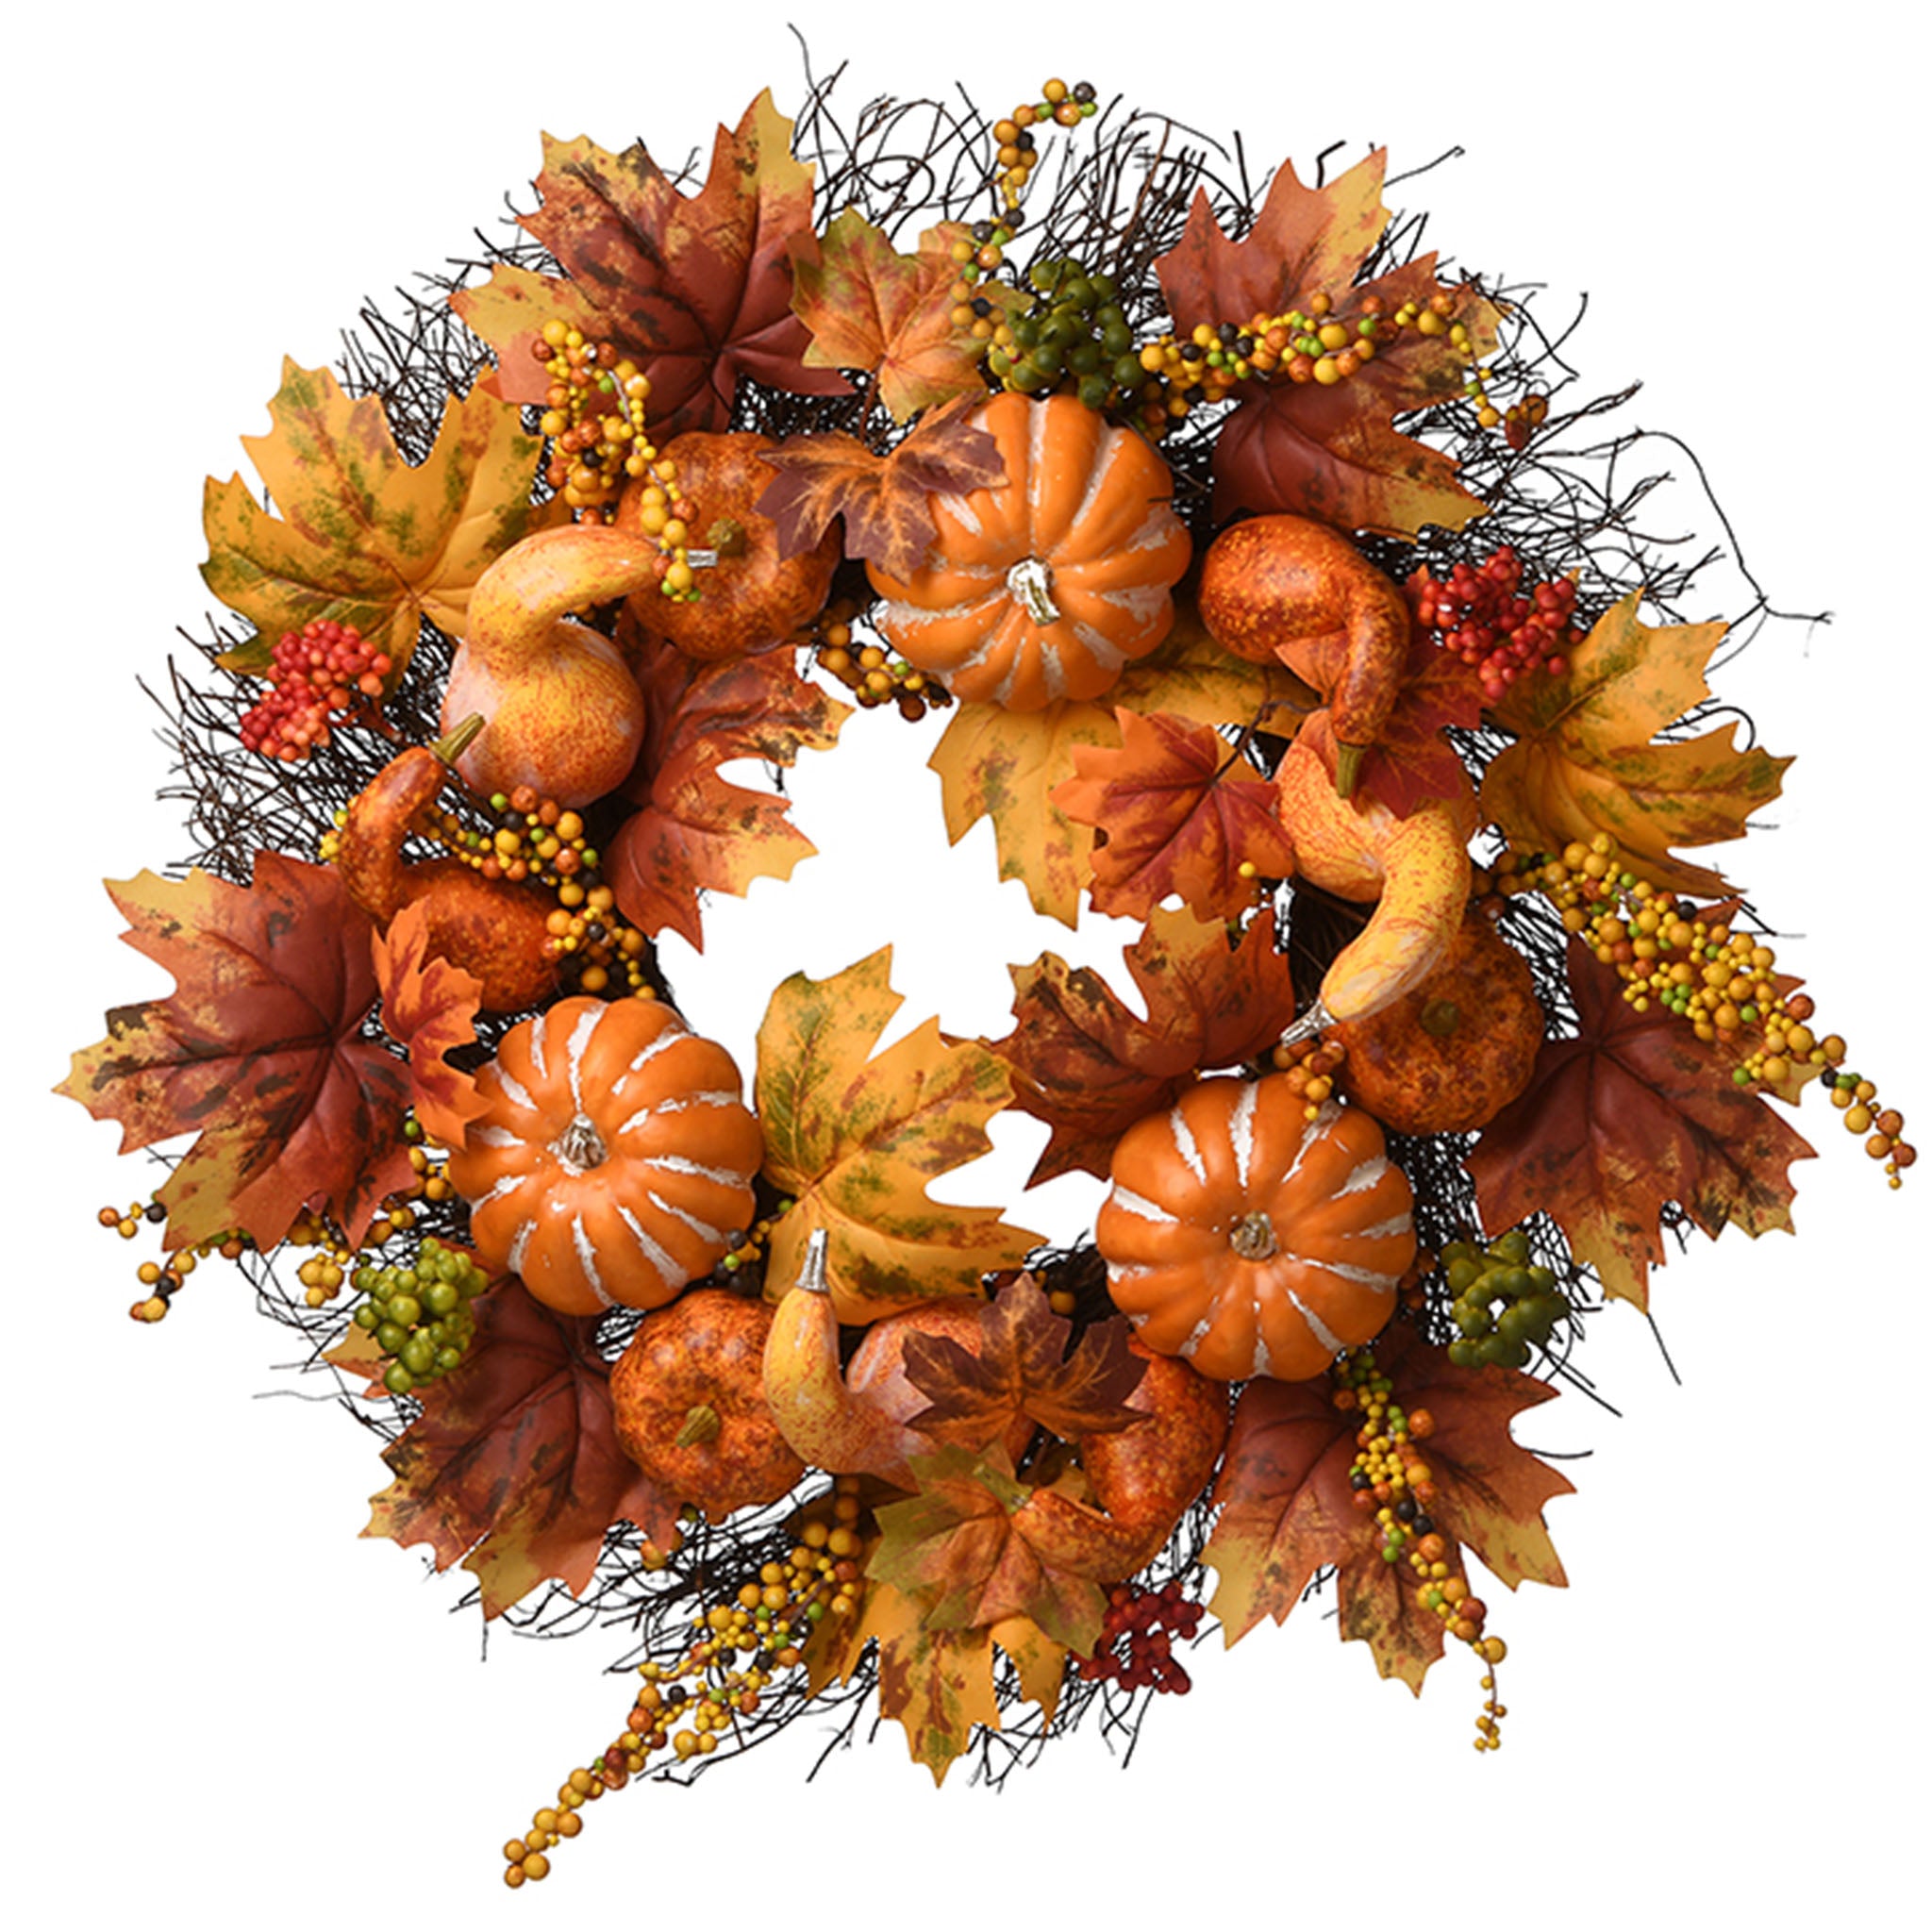 National Tree Company Artificial Autumn Wreath, Decorated with Pumpkins, Gourds, Berry Clusters, Maple Leaves, Autumn Collection, 22 in